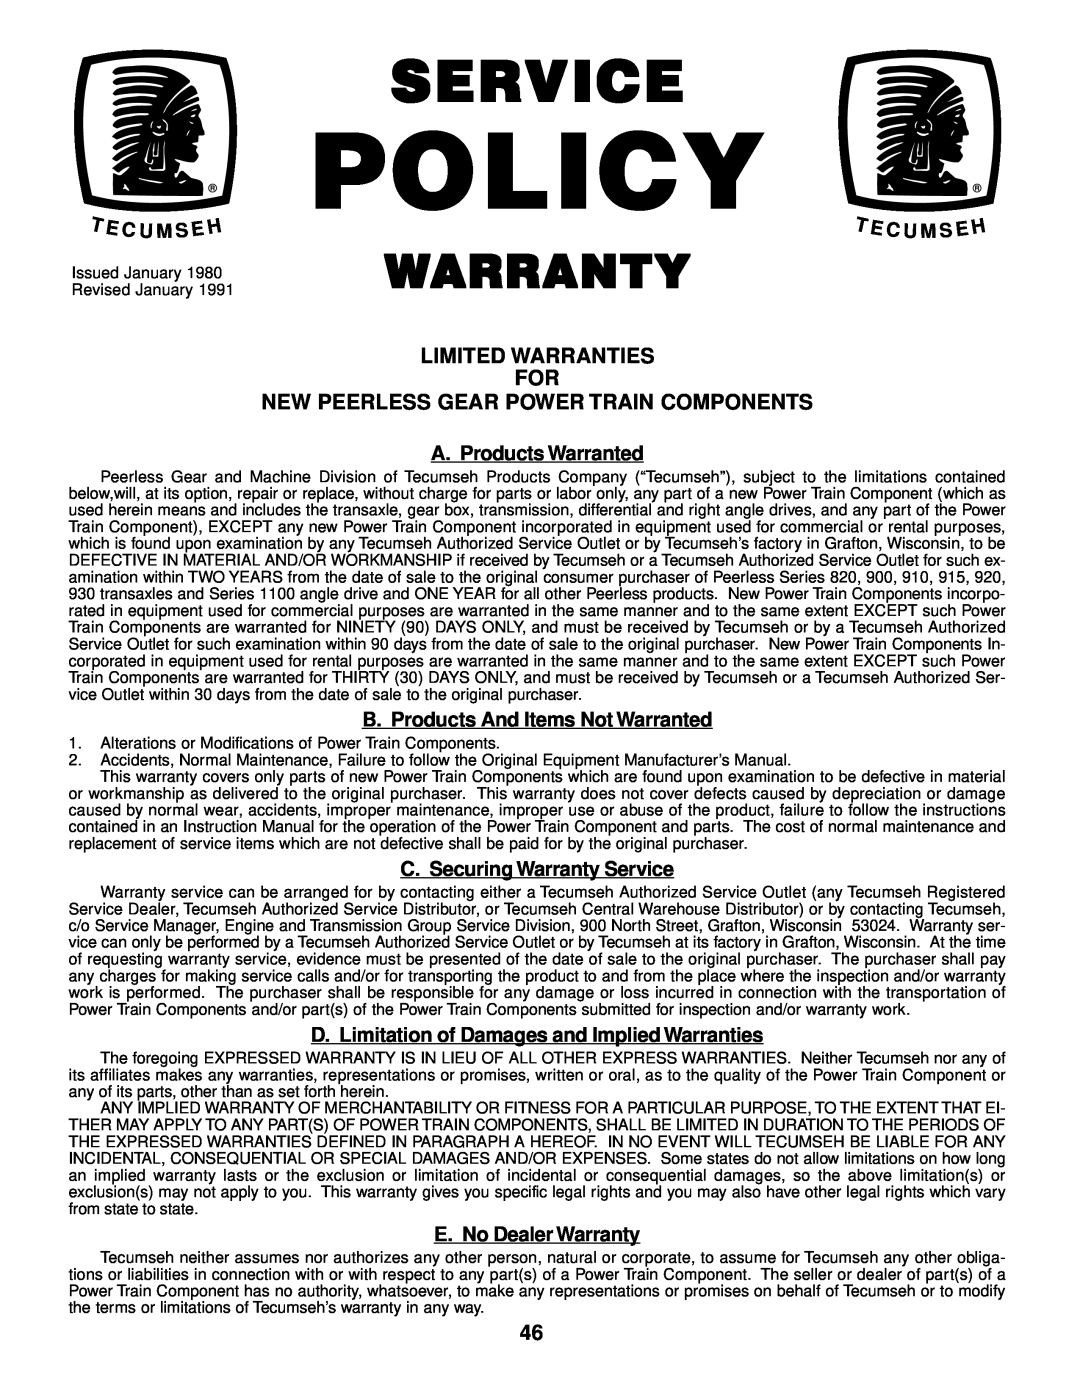 Poulan 176851 owner manual Limited Warranties, Policy, Service, Warranty 